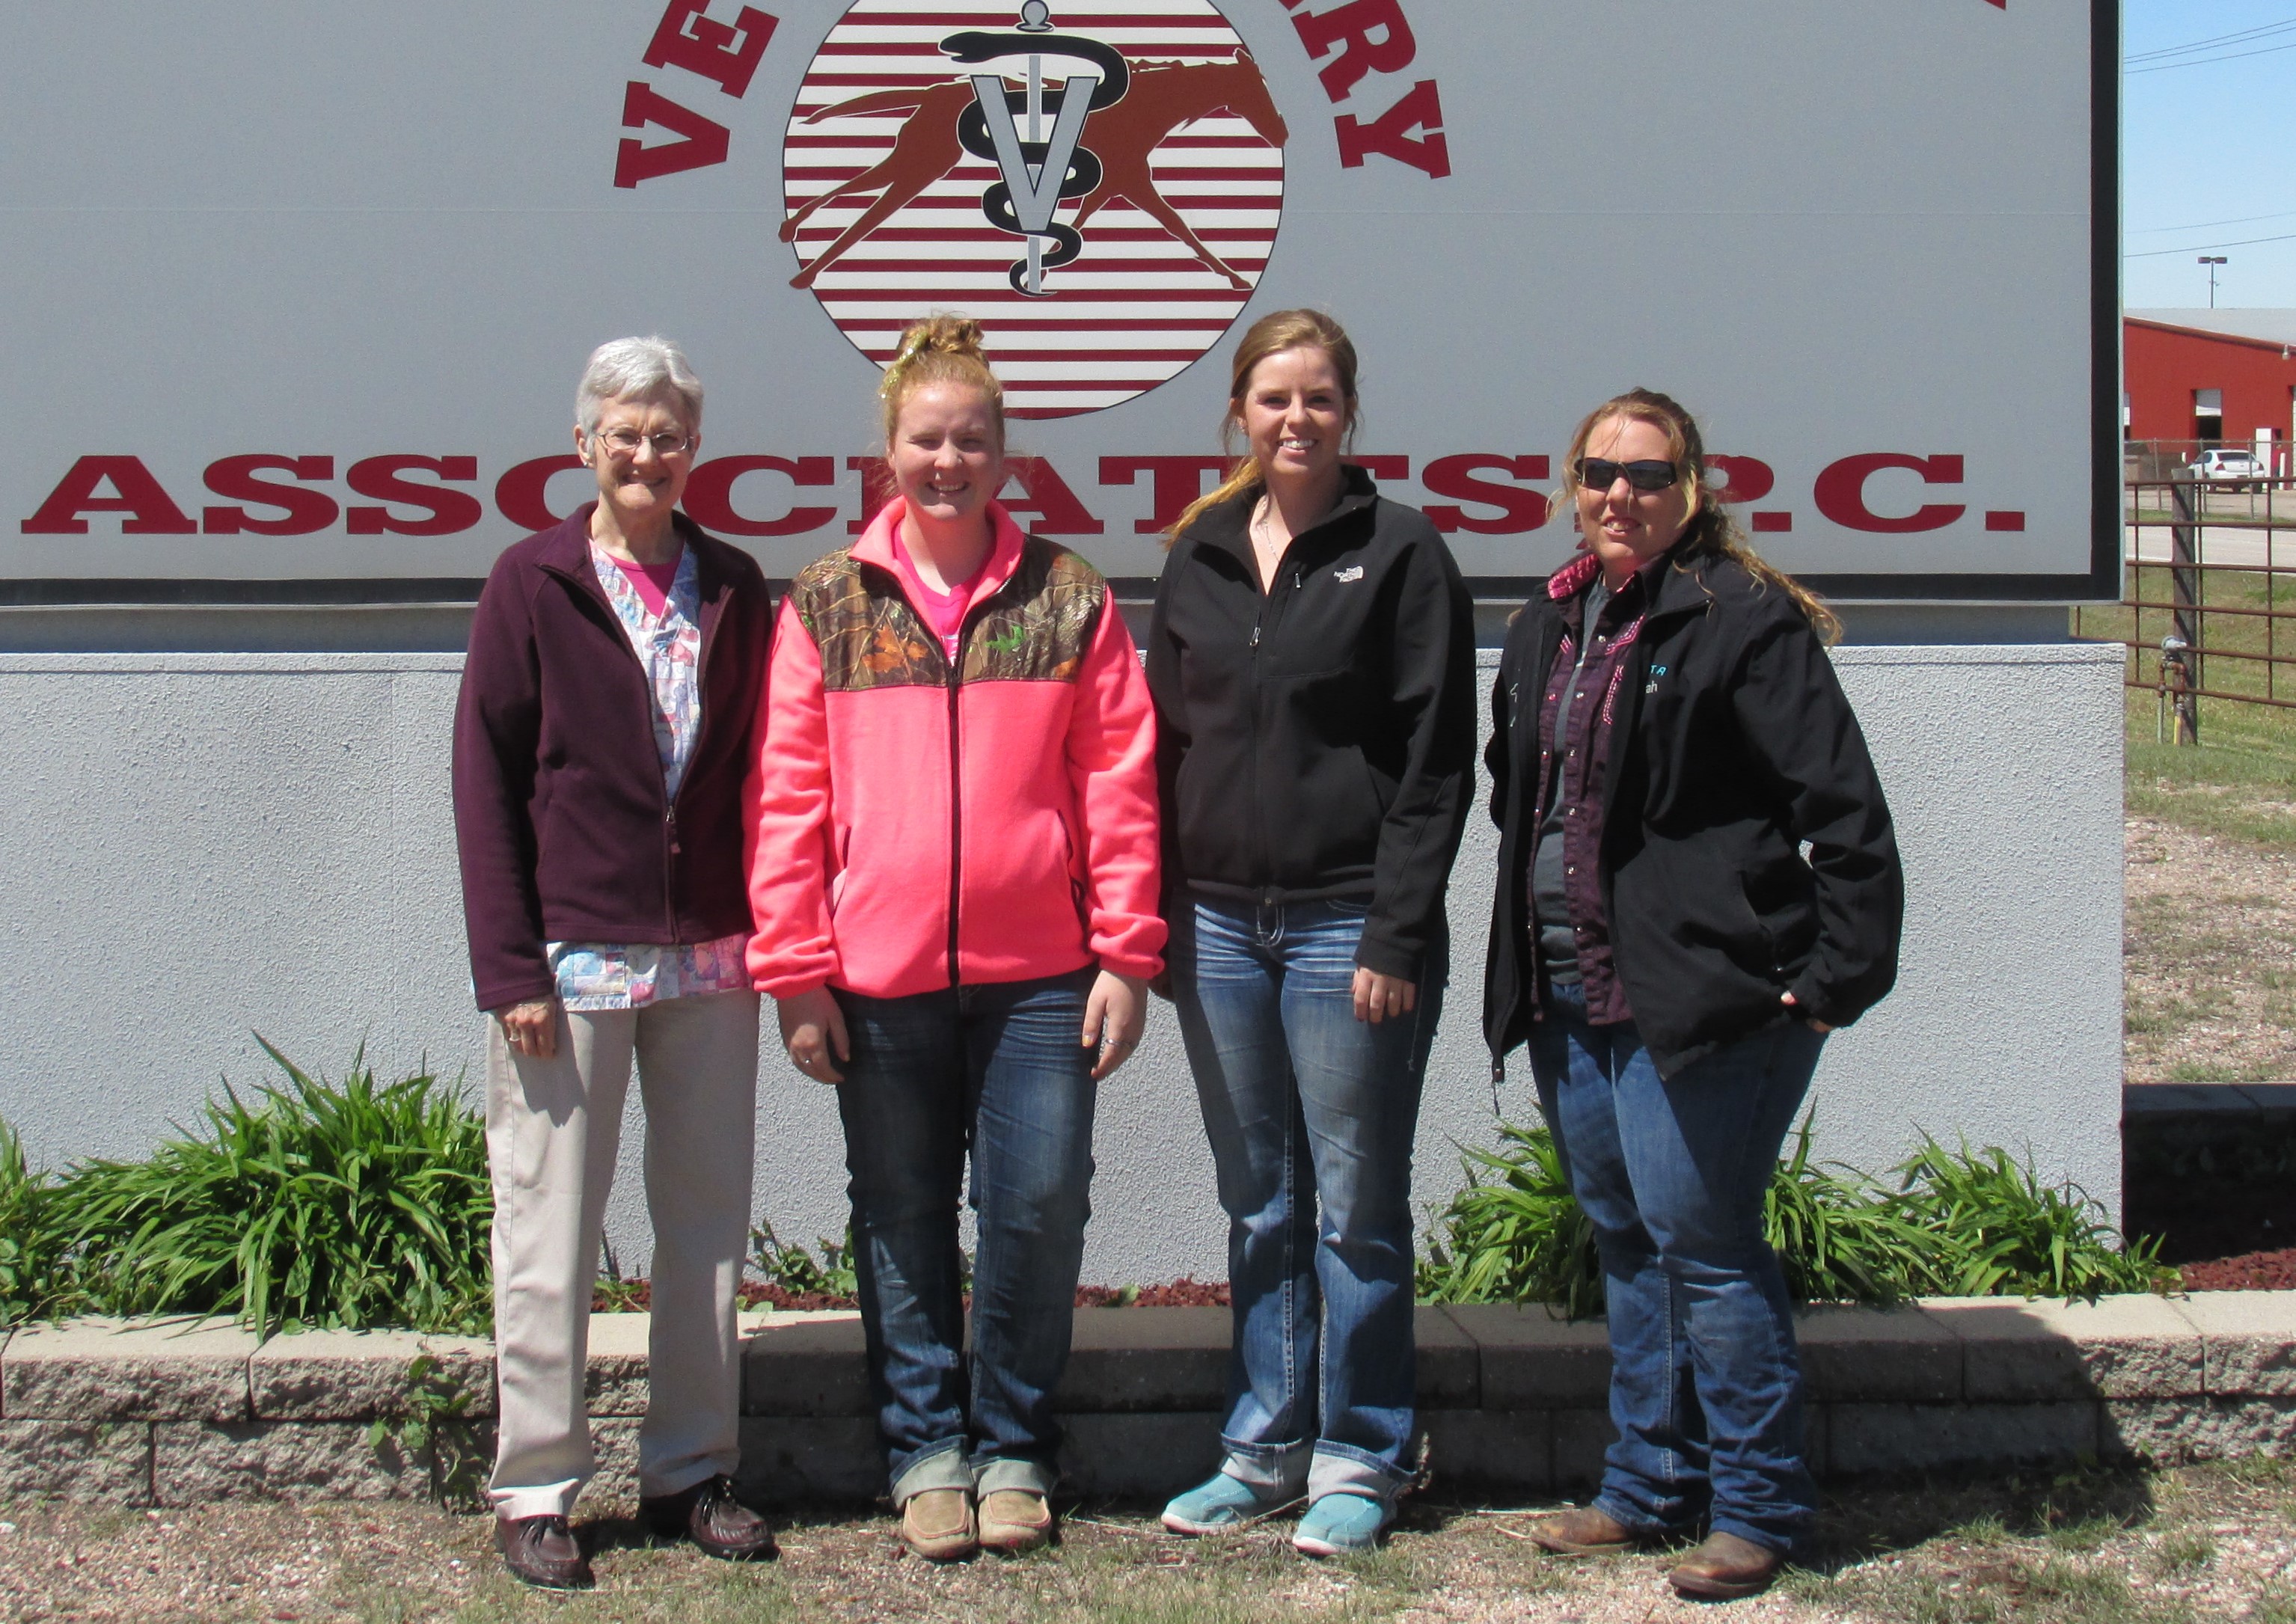 Professor Ricky Sue Barnes Wach, DVM, visited Grand Island with students (from left) Carli Johnson of Hastings, Rachel Schmitz of O`Neill and Sarah Waltemath of Elm Creek. The students are in NCTA’s Veterinary Technology program.  (Courtesy photo)     